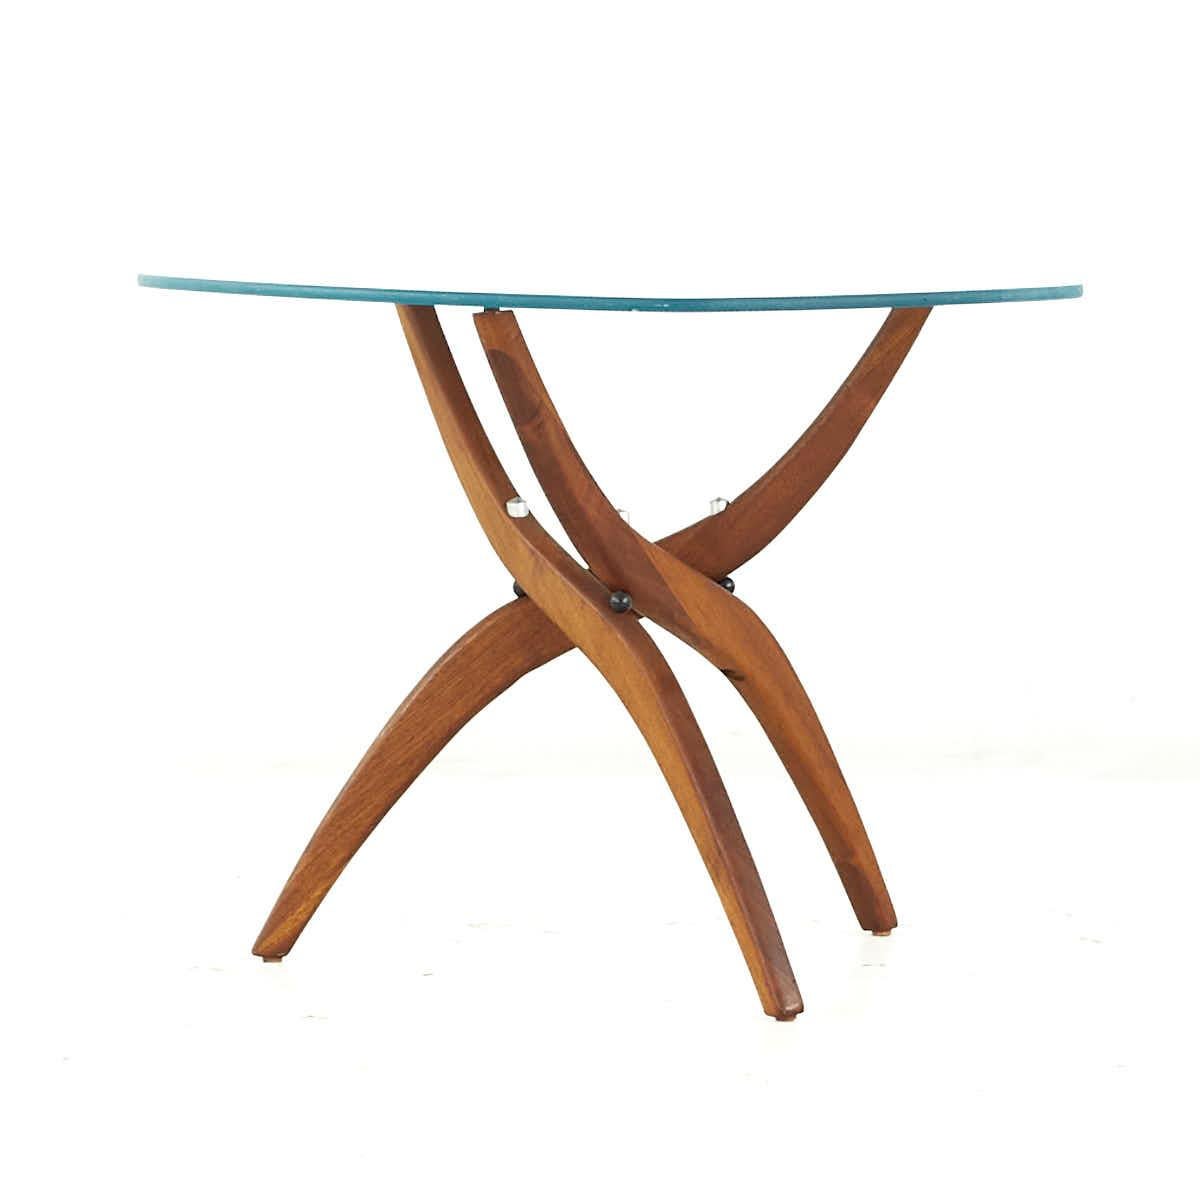 Forest Wilson Mid Century Walnut Side Tables – Pair In Good Condition For Sale In Countryside, IL